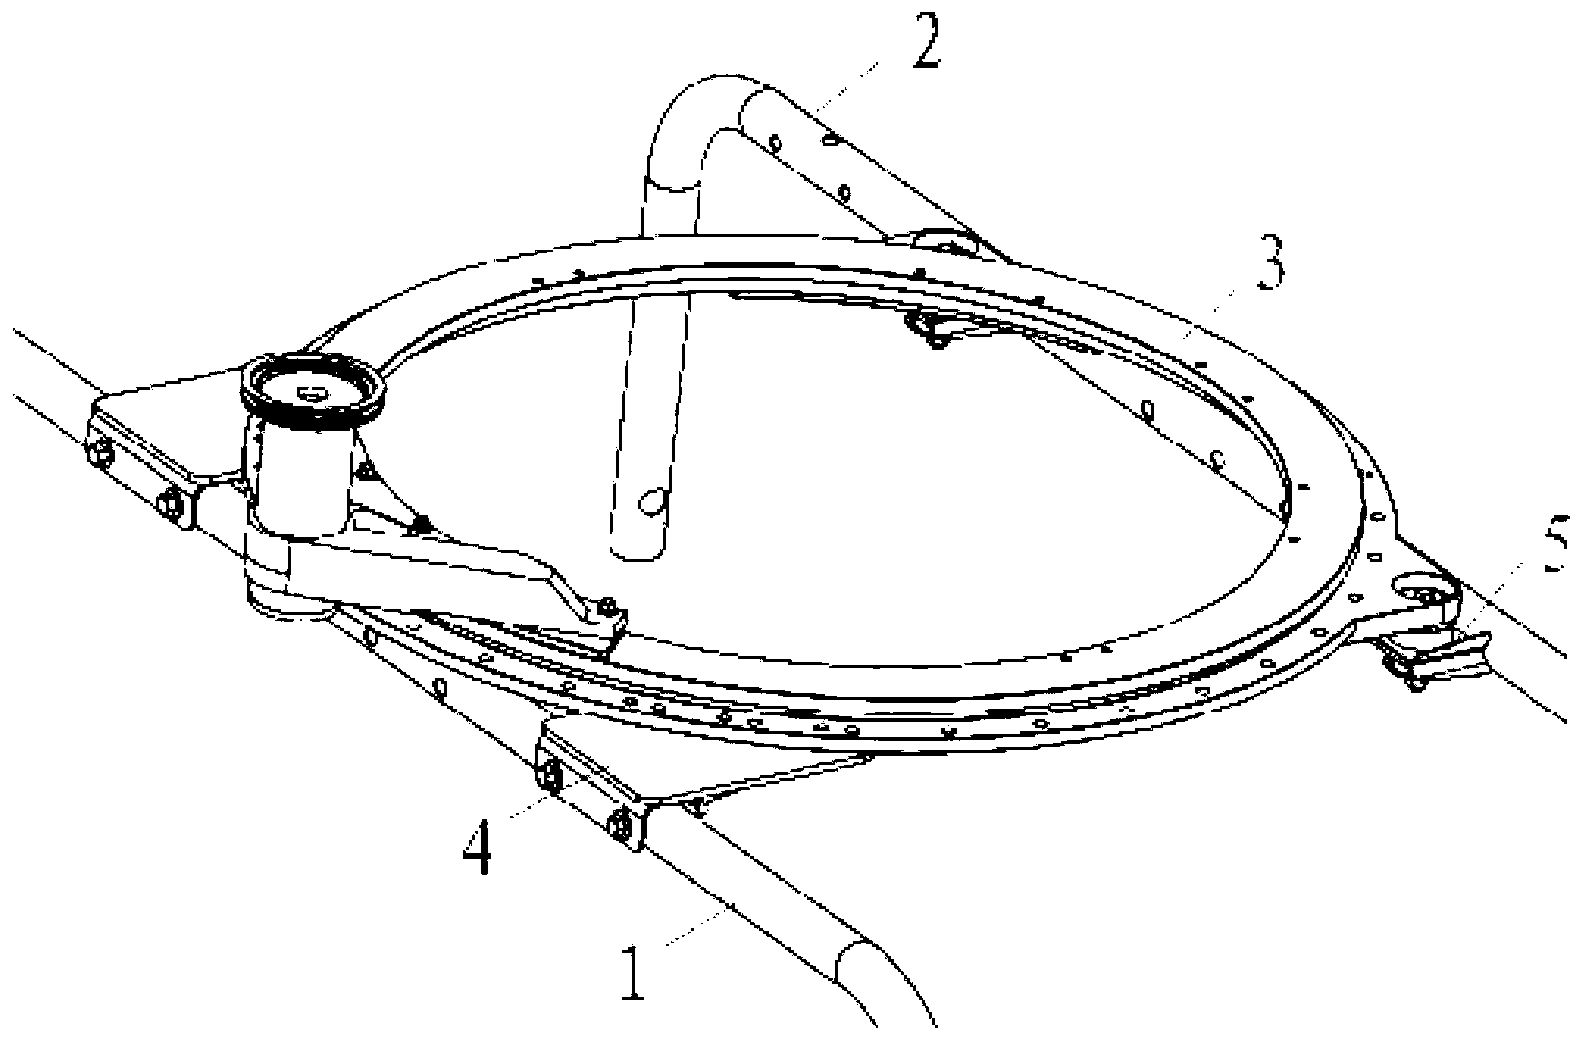 On-vehicle weapon turntable fixing structure